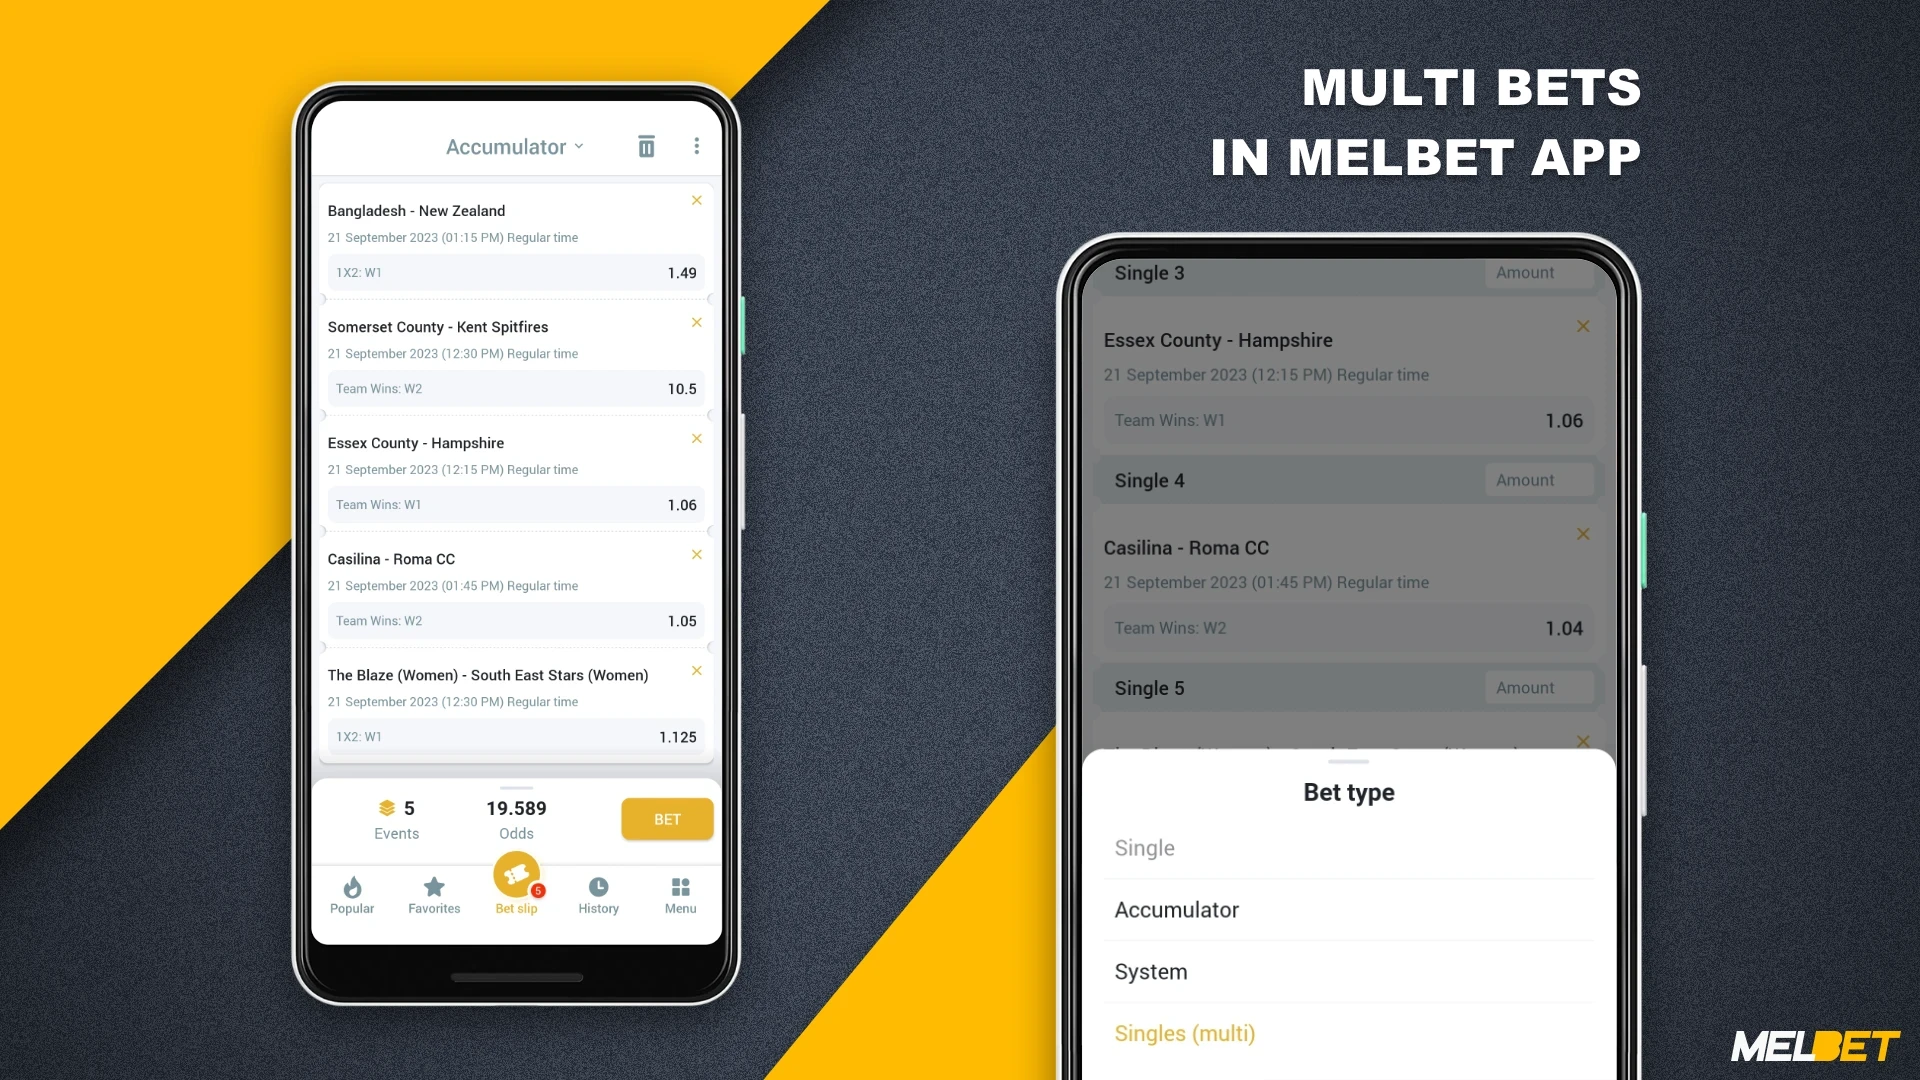 Melbet app users have access to multi-bets